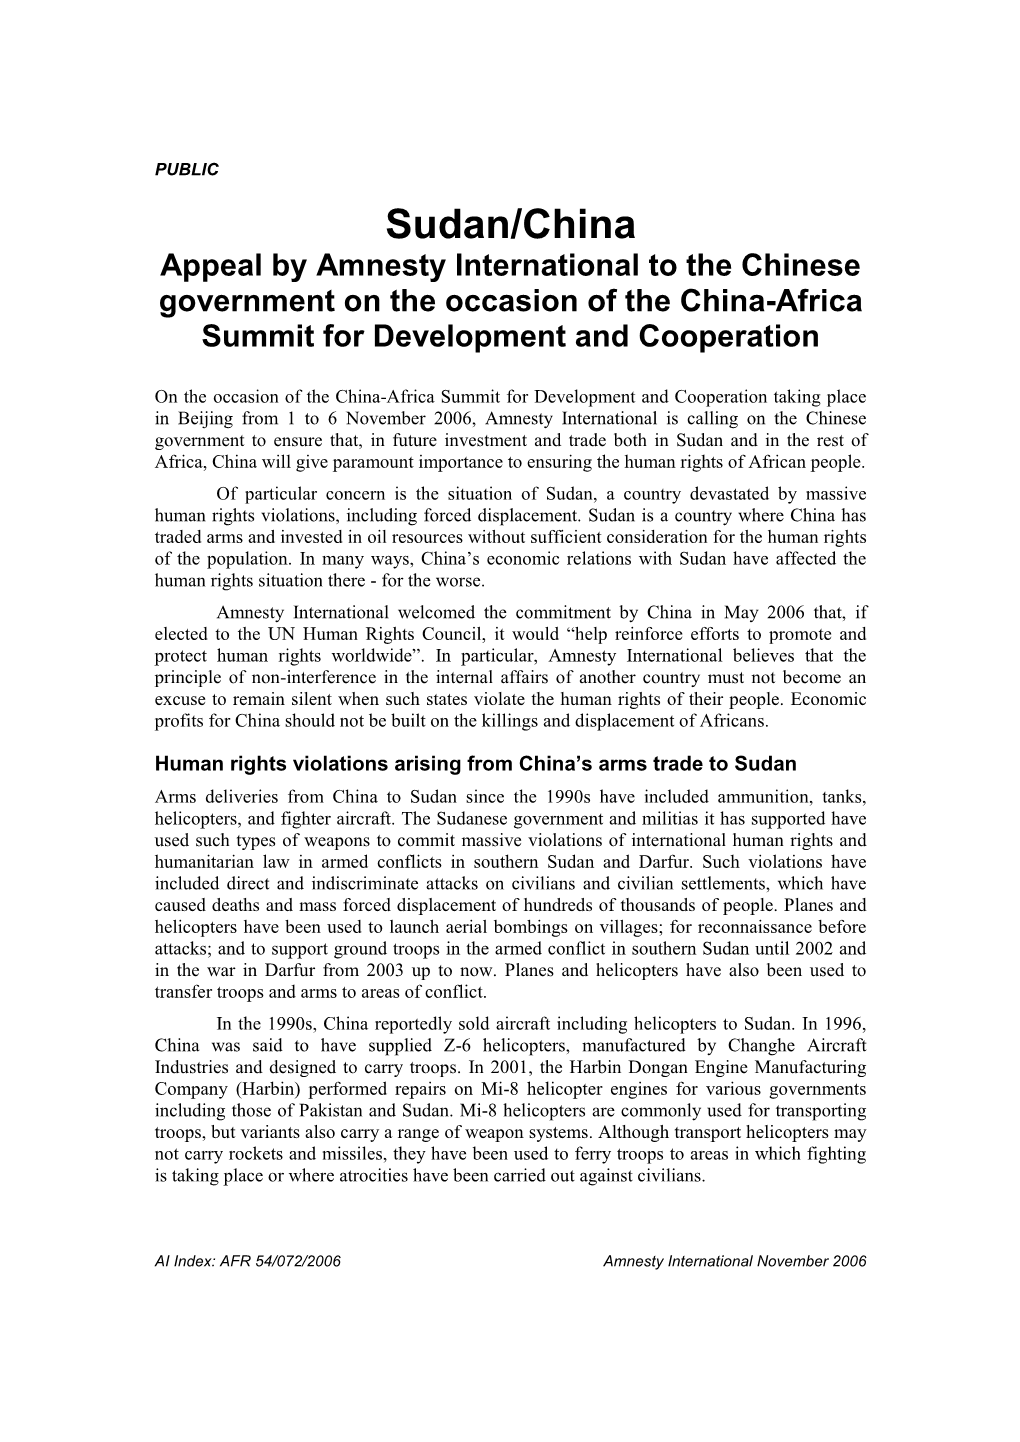 Appeal by Amnesty International to the Chinese Government on the Occasion of the China-Africa Summit for Development and Cooperation